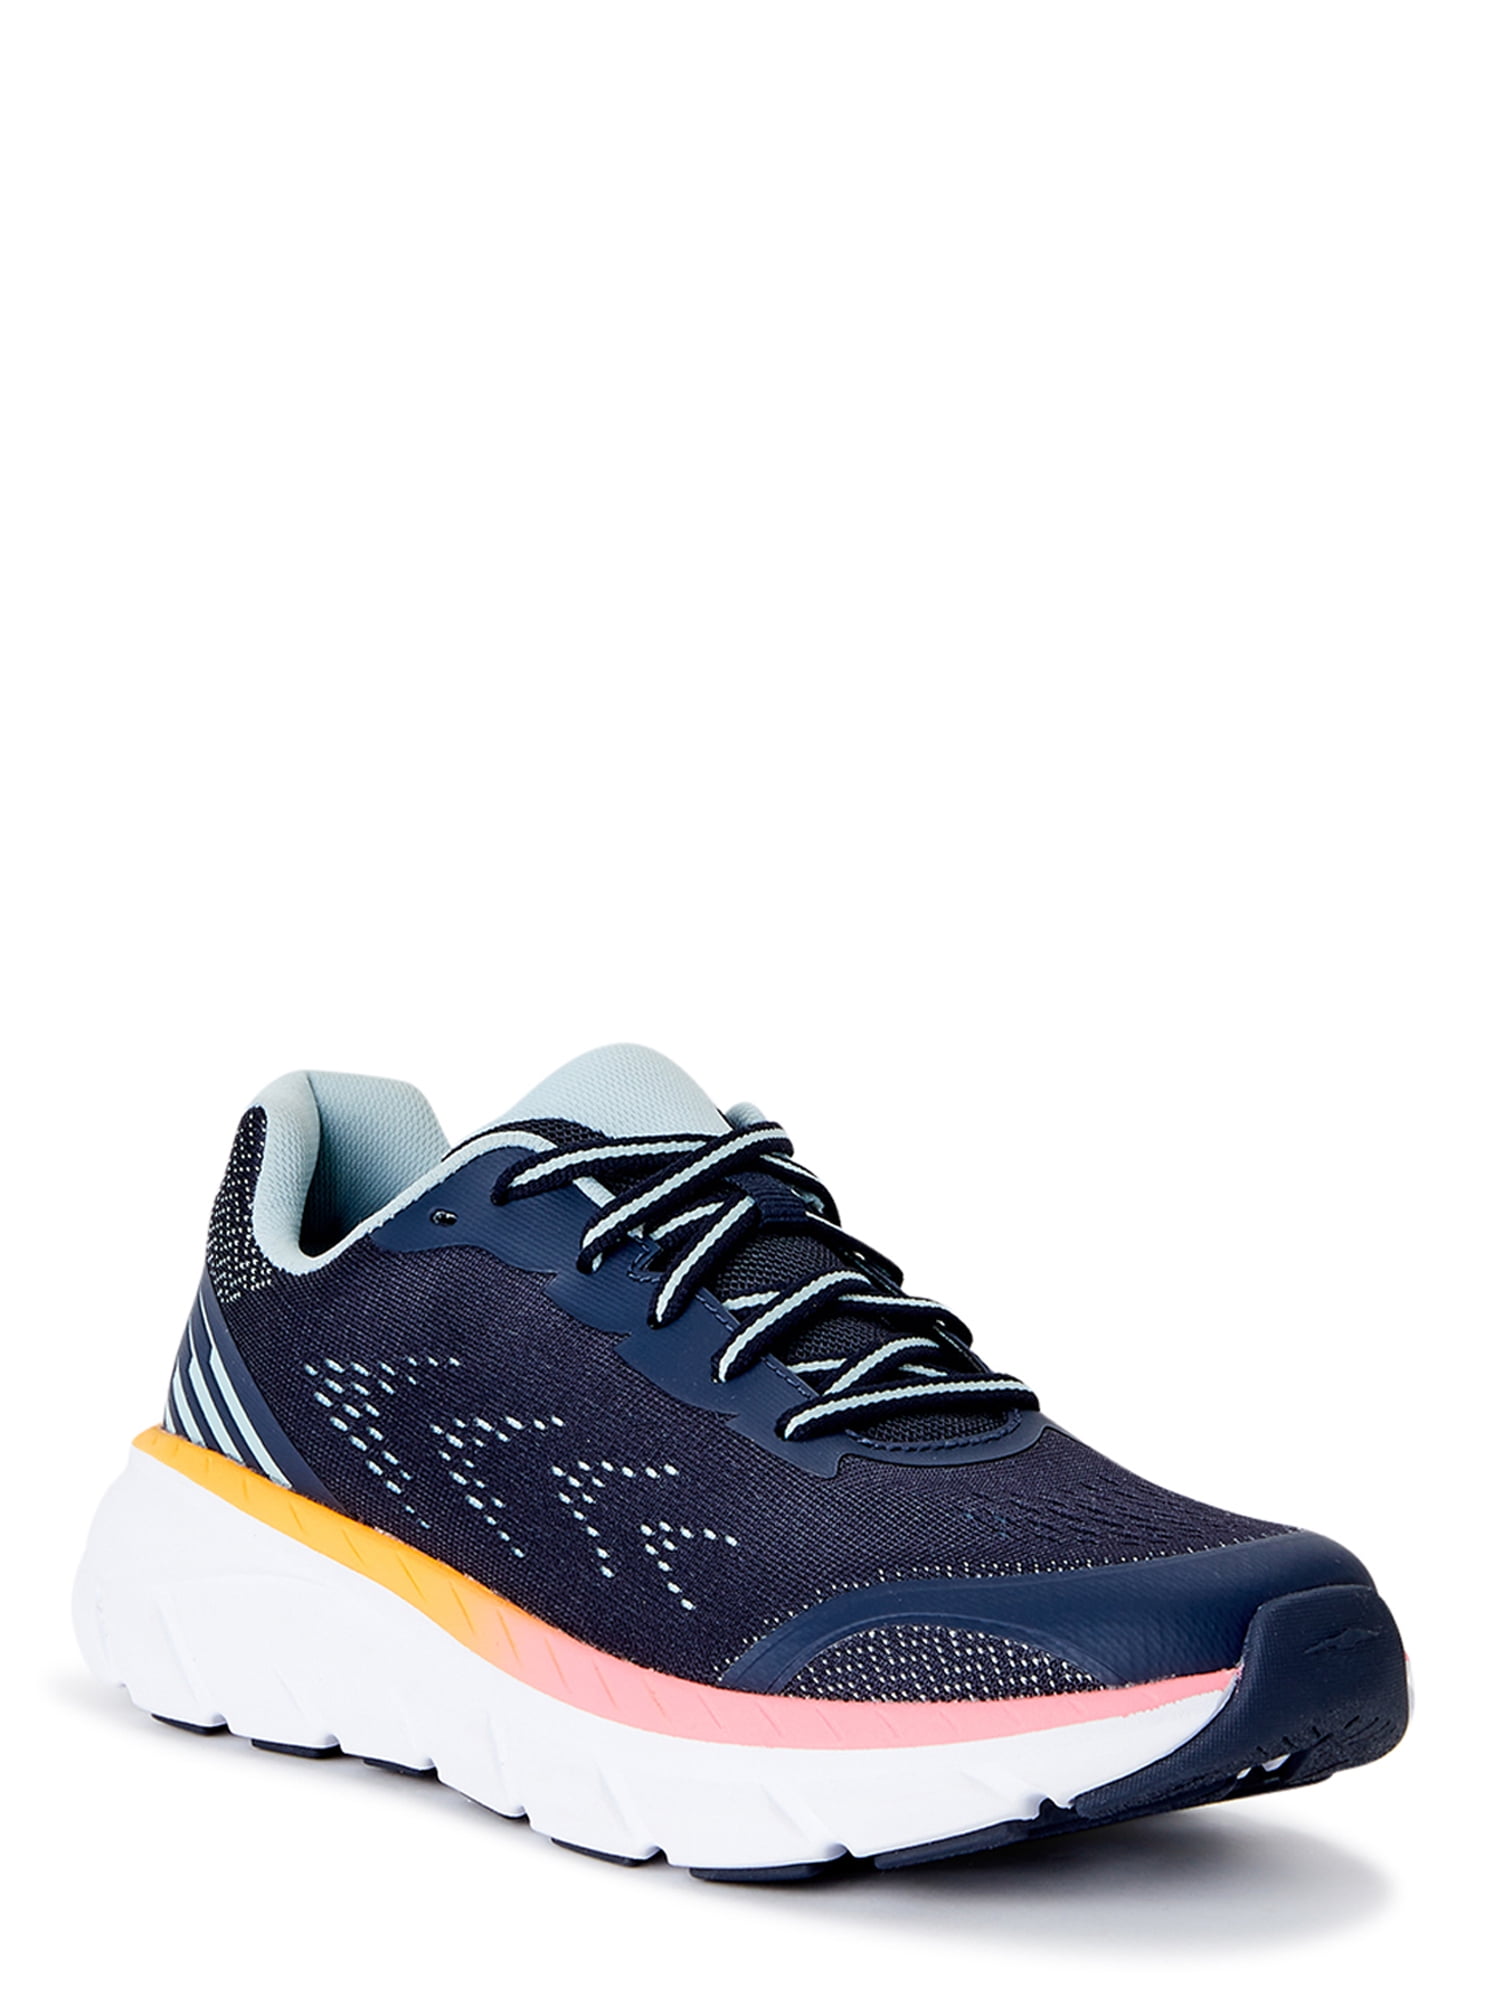 Avia Women's Hightail Athletic Sneakers, Wide Width Available - Walmart.com